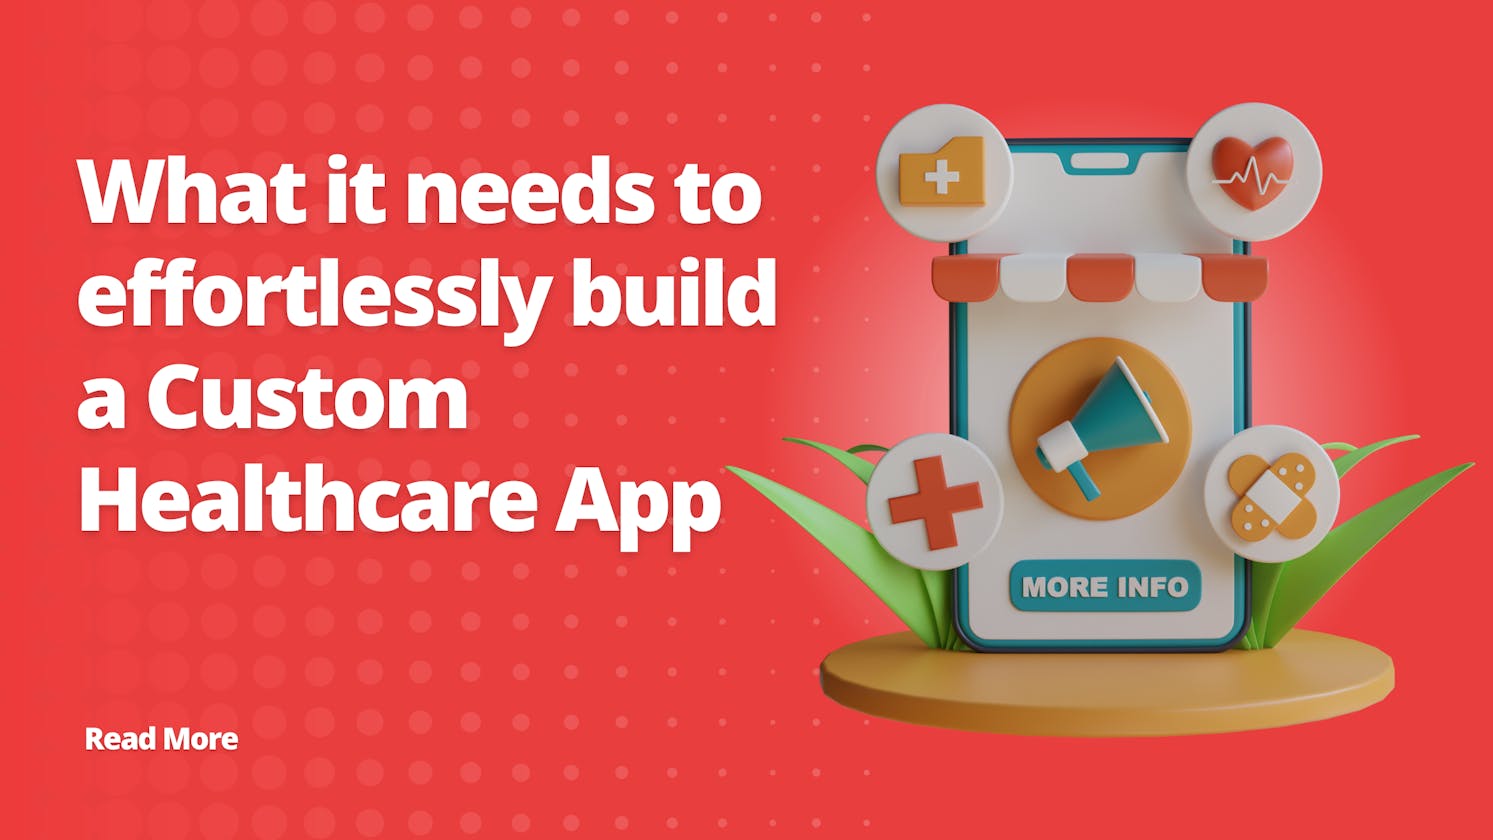 What it needs to effortlessly build a custom healthcare app